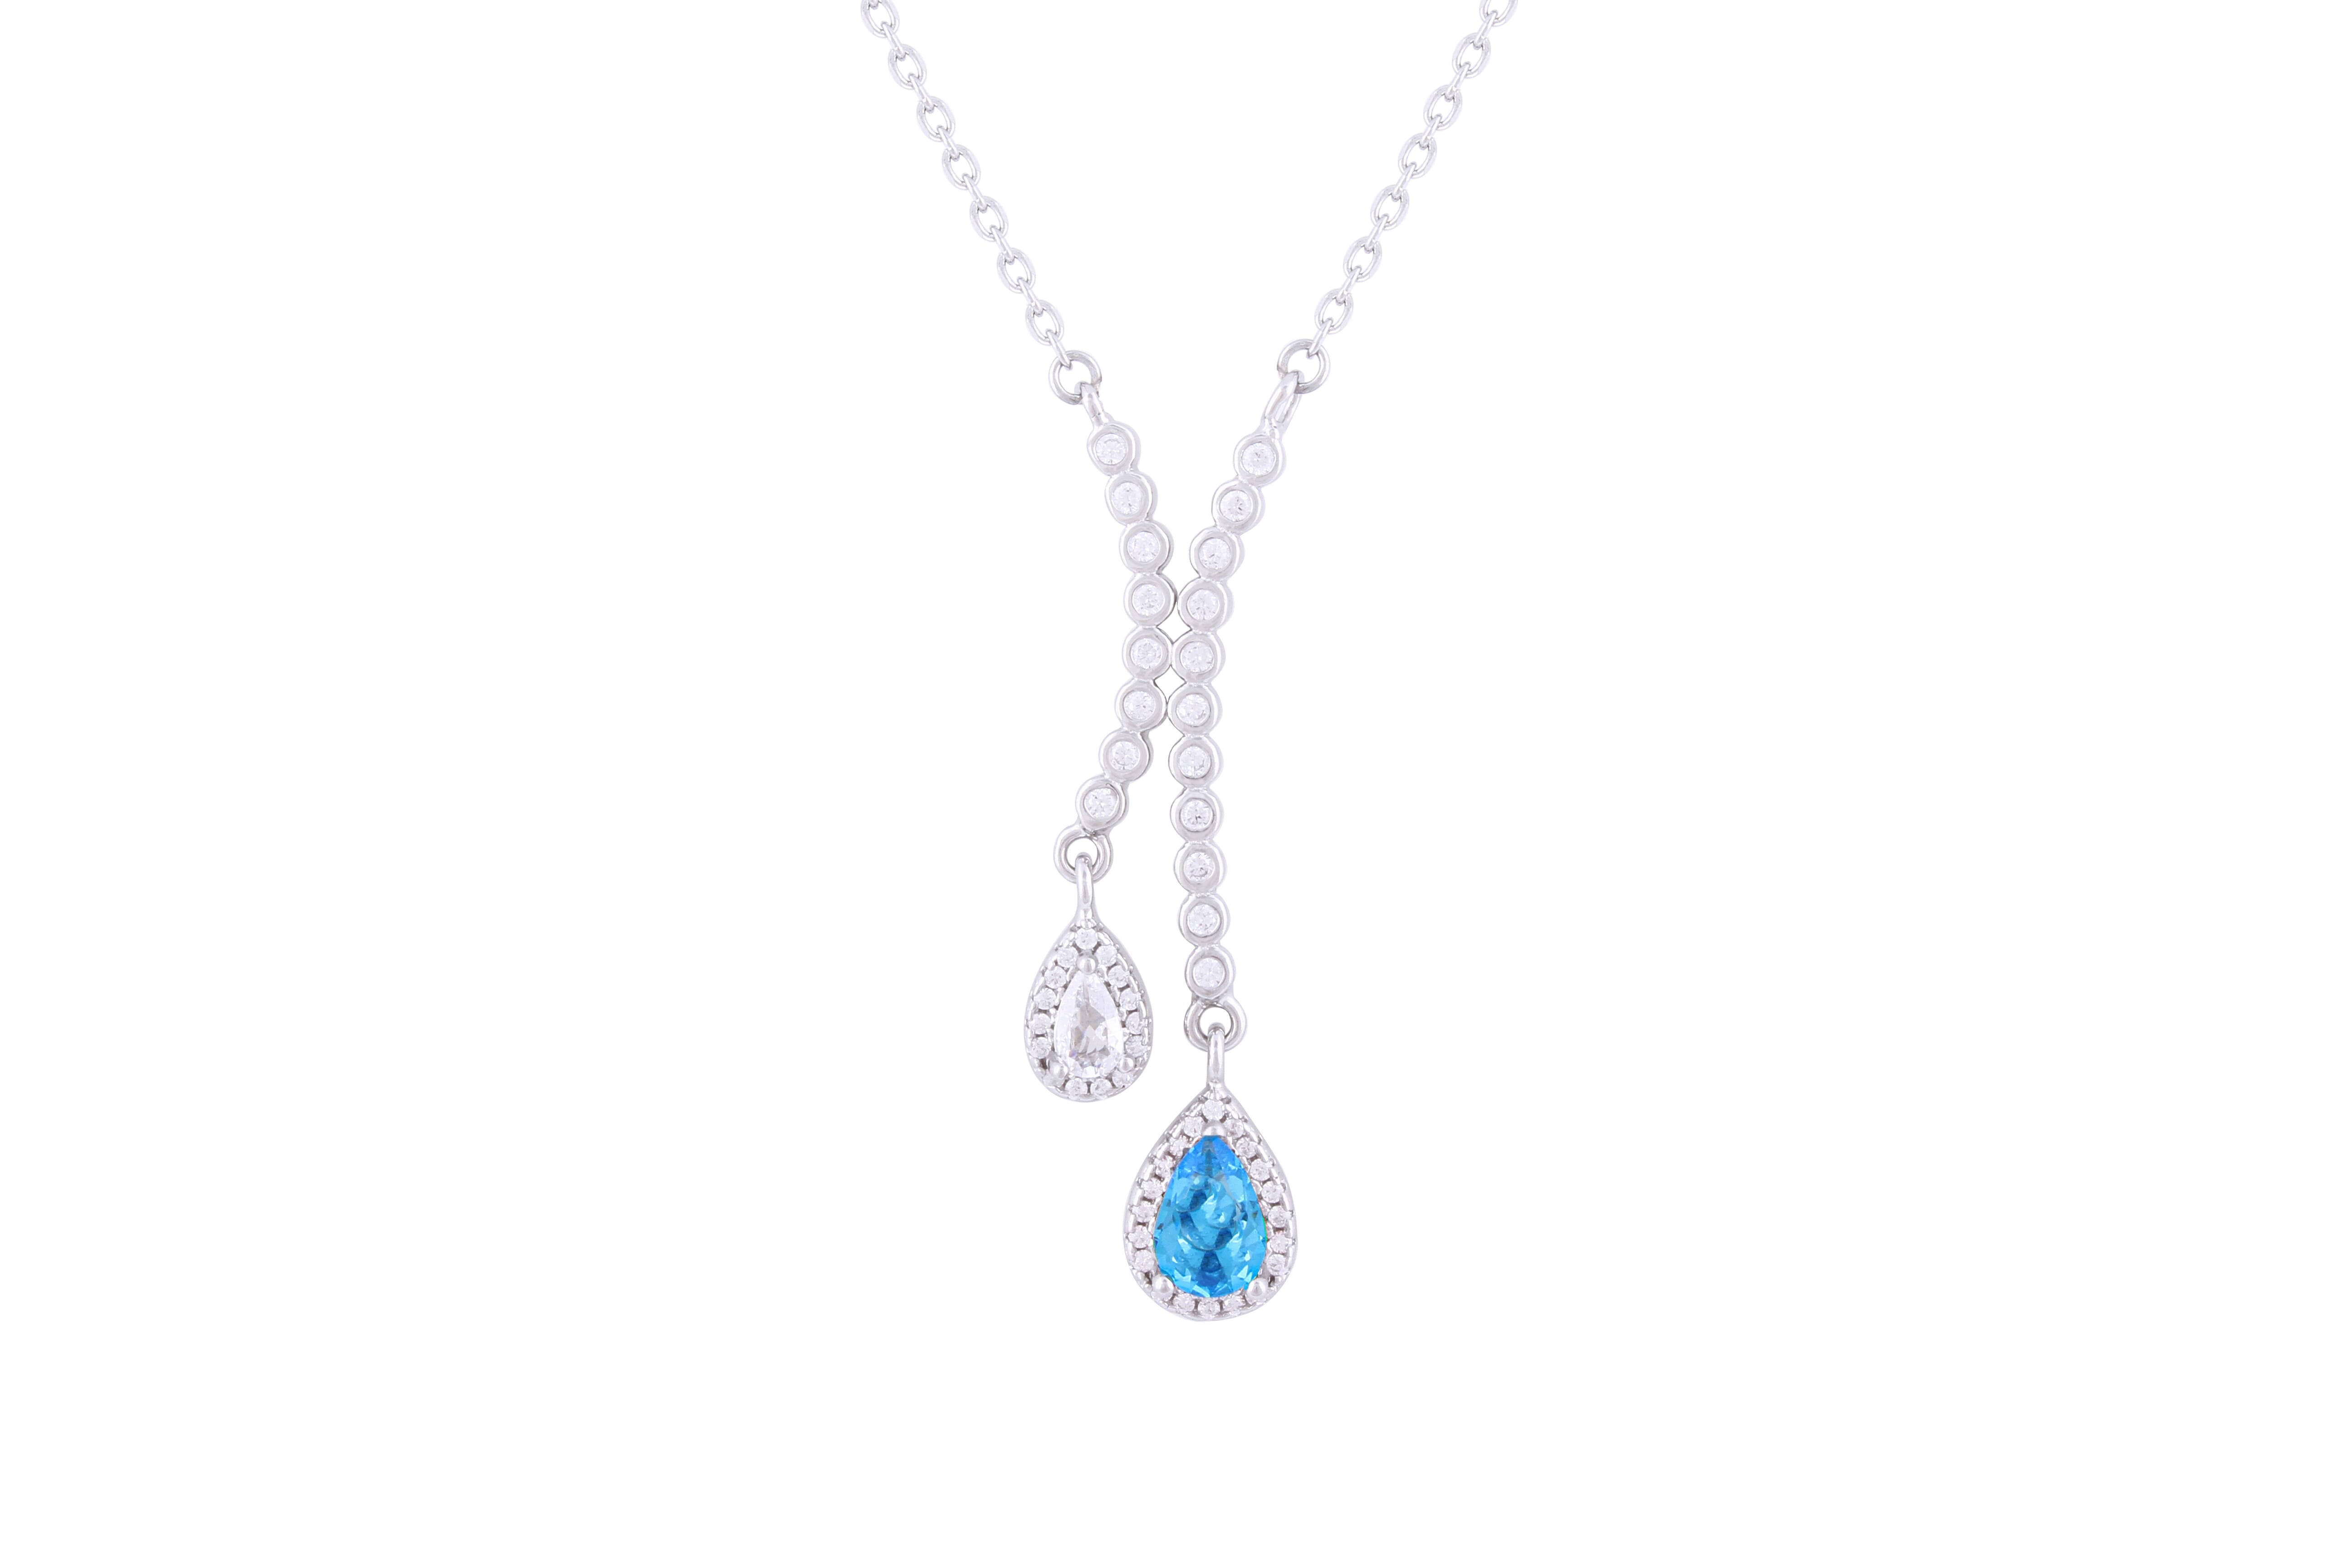 Asfour 925 Sterling Silver Necklace Inlaid With Aquamarine Pear Stone NR0497-WM